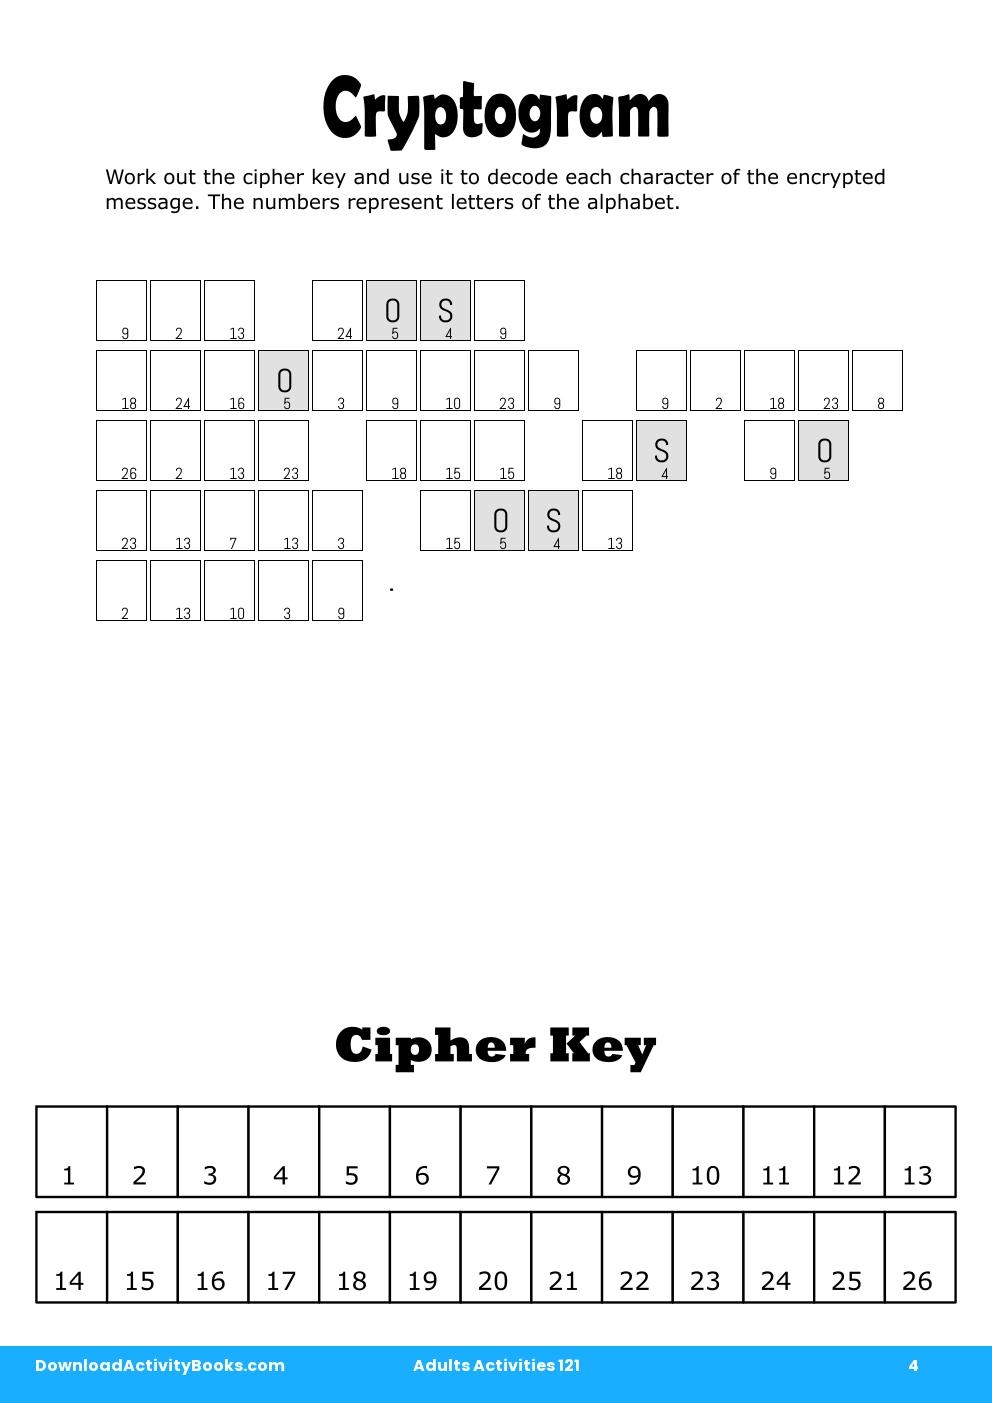 Cryptogram in Adults Activities 121